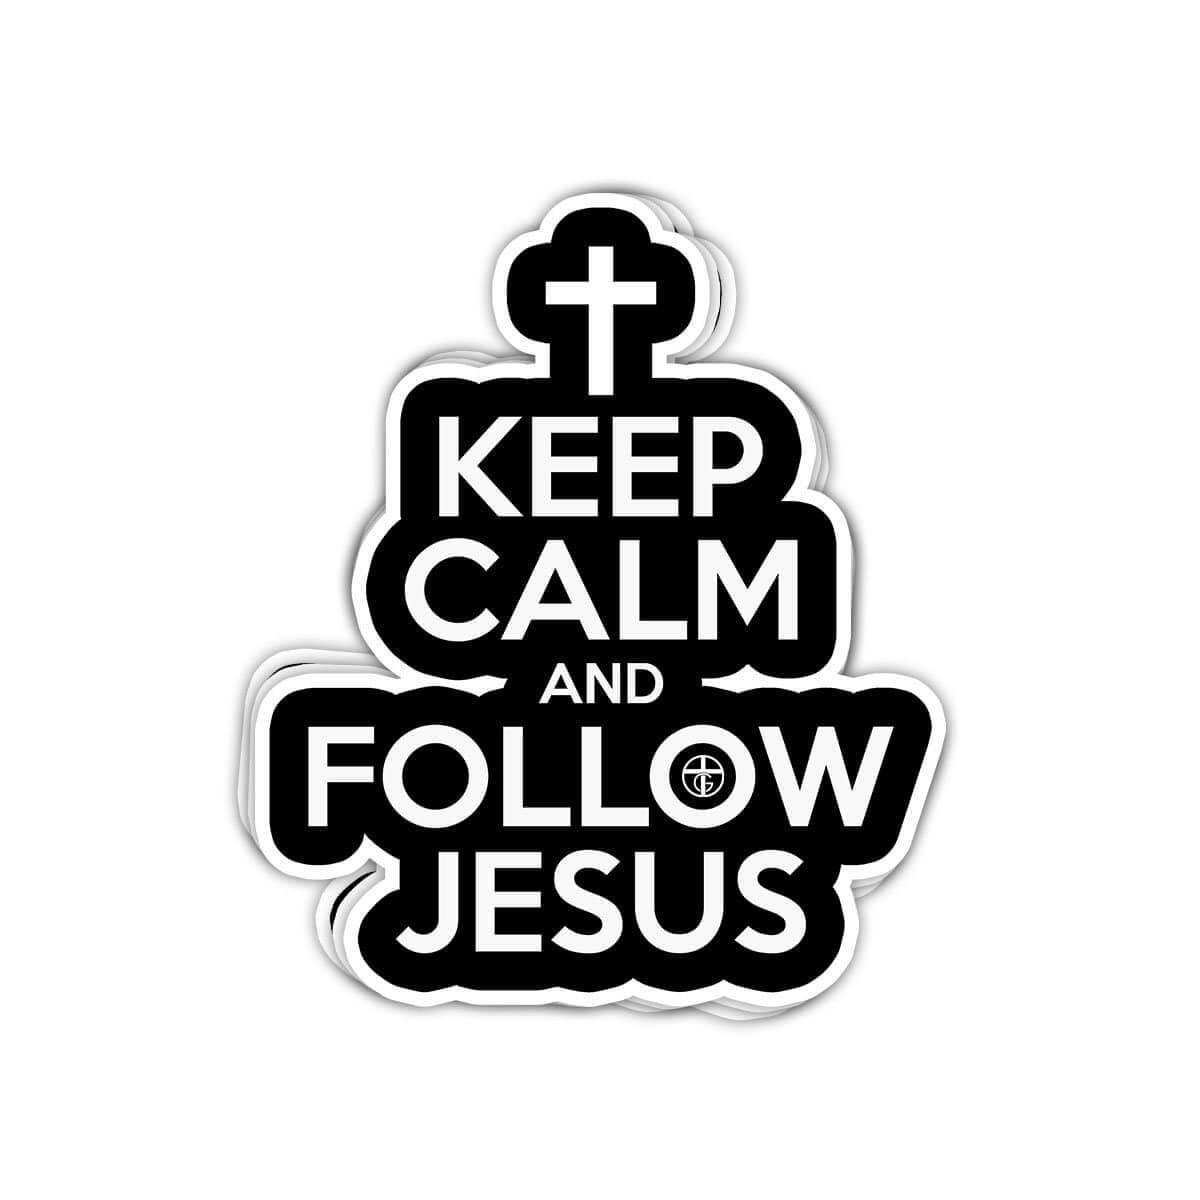 Keep Calm and Follow Jesus Decals